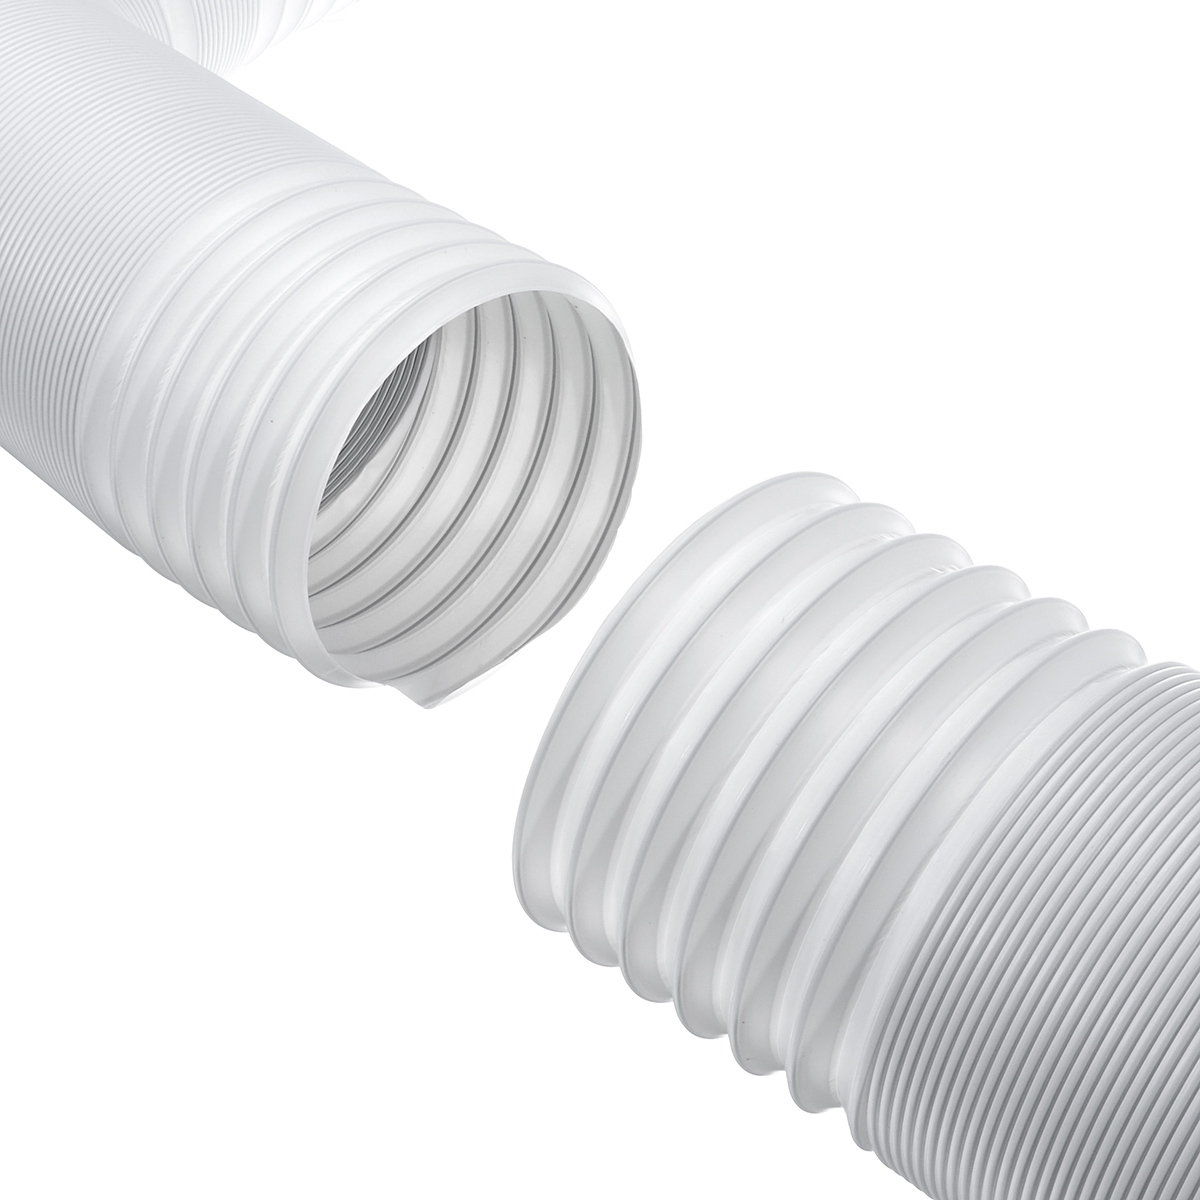 DIA-5-Universal-Pipe-Duct-Air-Conditioner-Exhaust-Hose-For-Range-Hoods-Kitchen-1554659-10